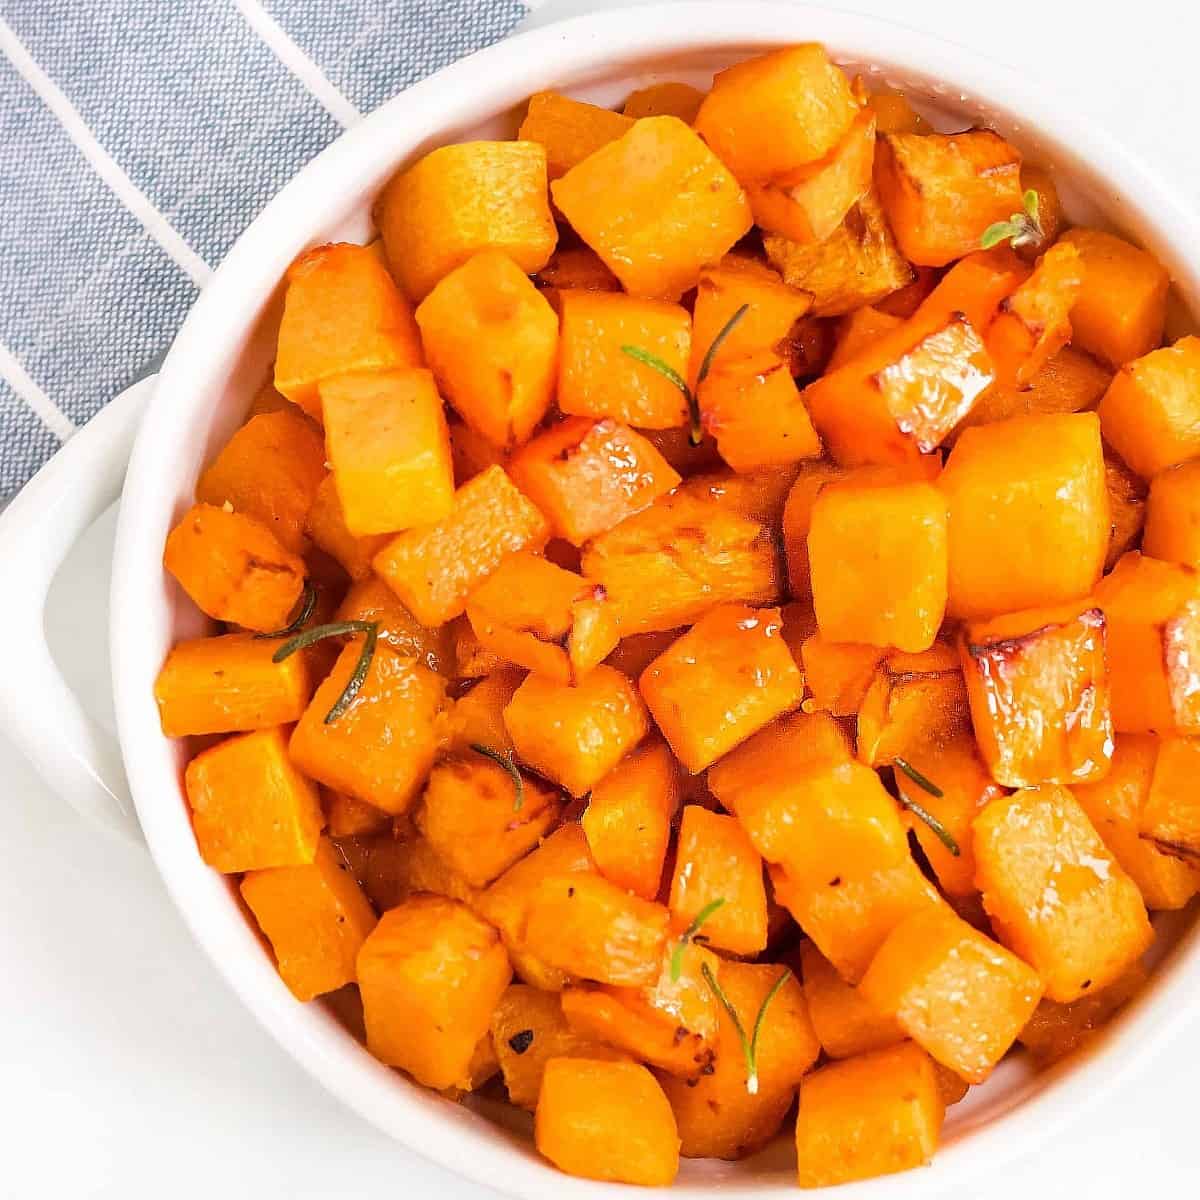 Overhead view of cooked cubed butternut squash in a white bowl.